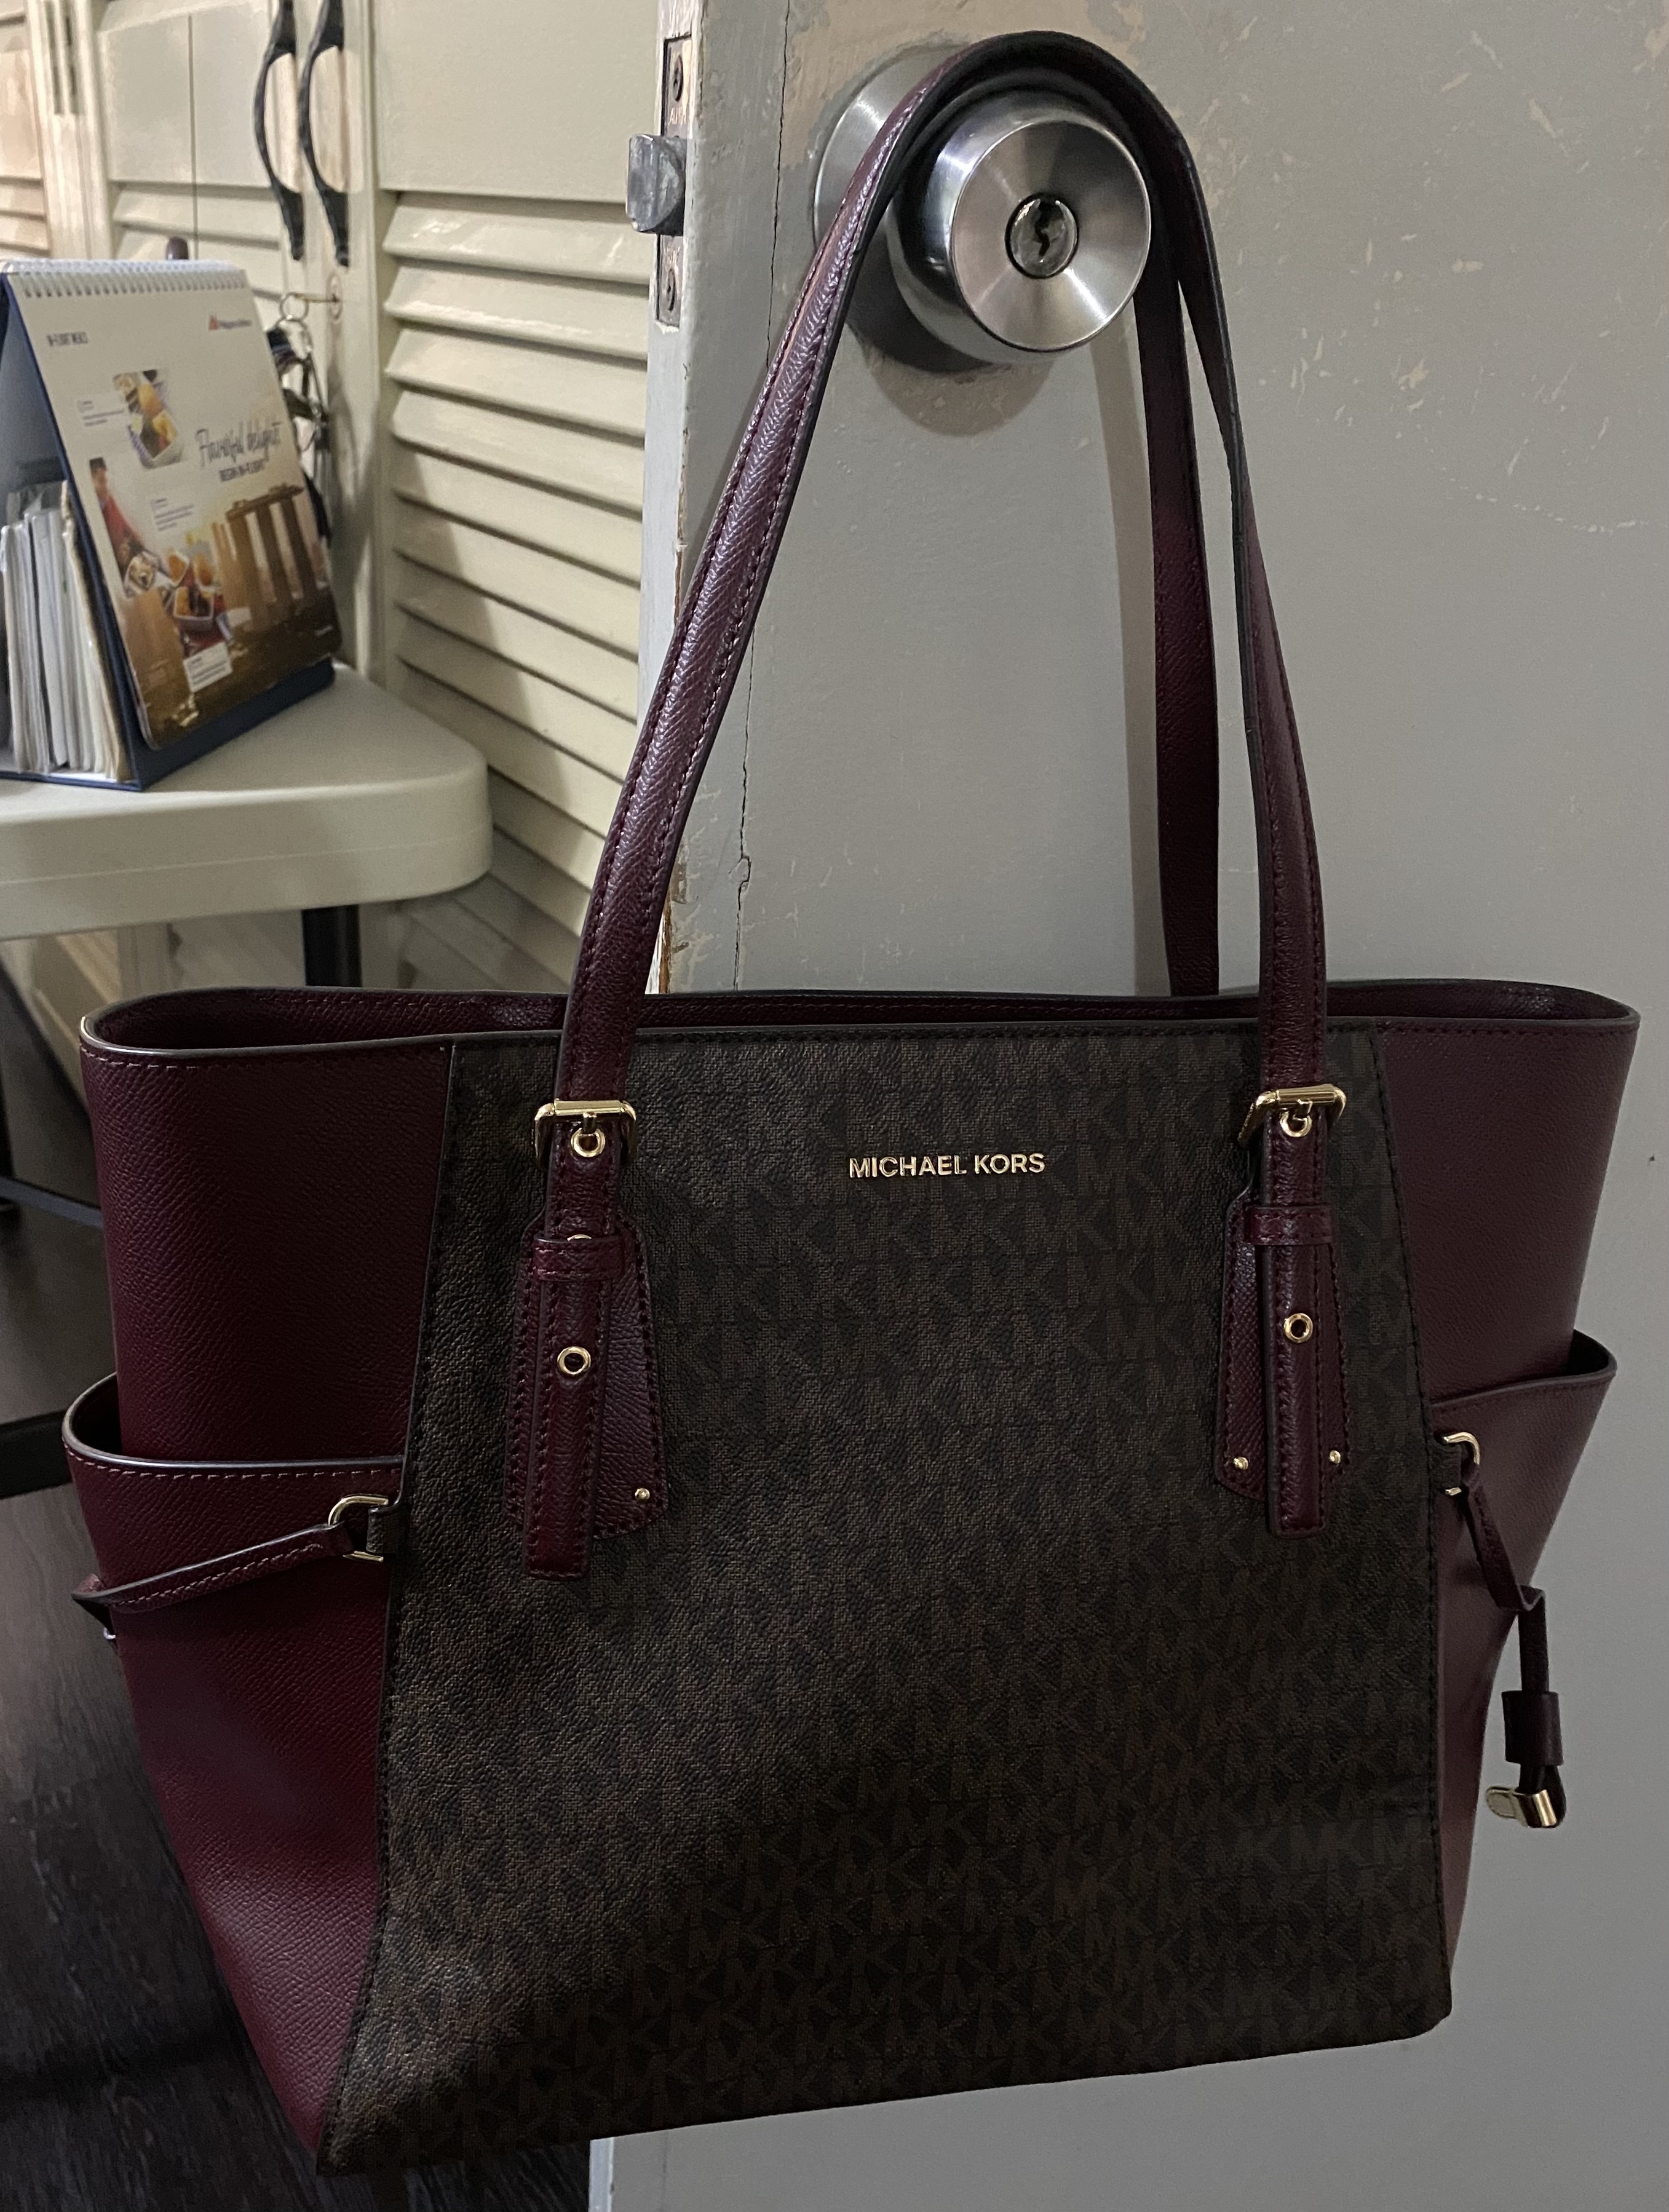 WOMEN'S ORIGINAL Michael Kors Voyager East West Signature Tote BRAND NEW  (USA Macy's Purchased with Orig. Price Tag still attached shown on photo)